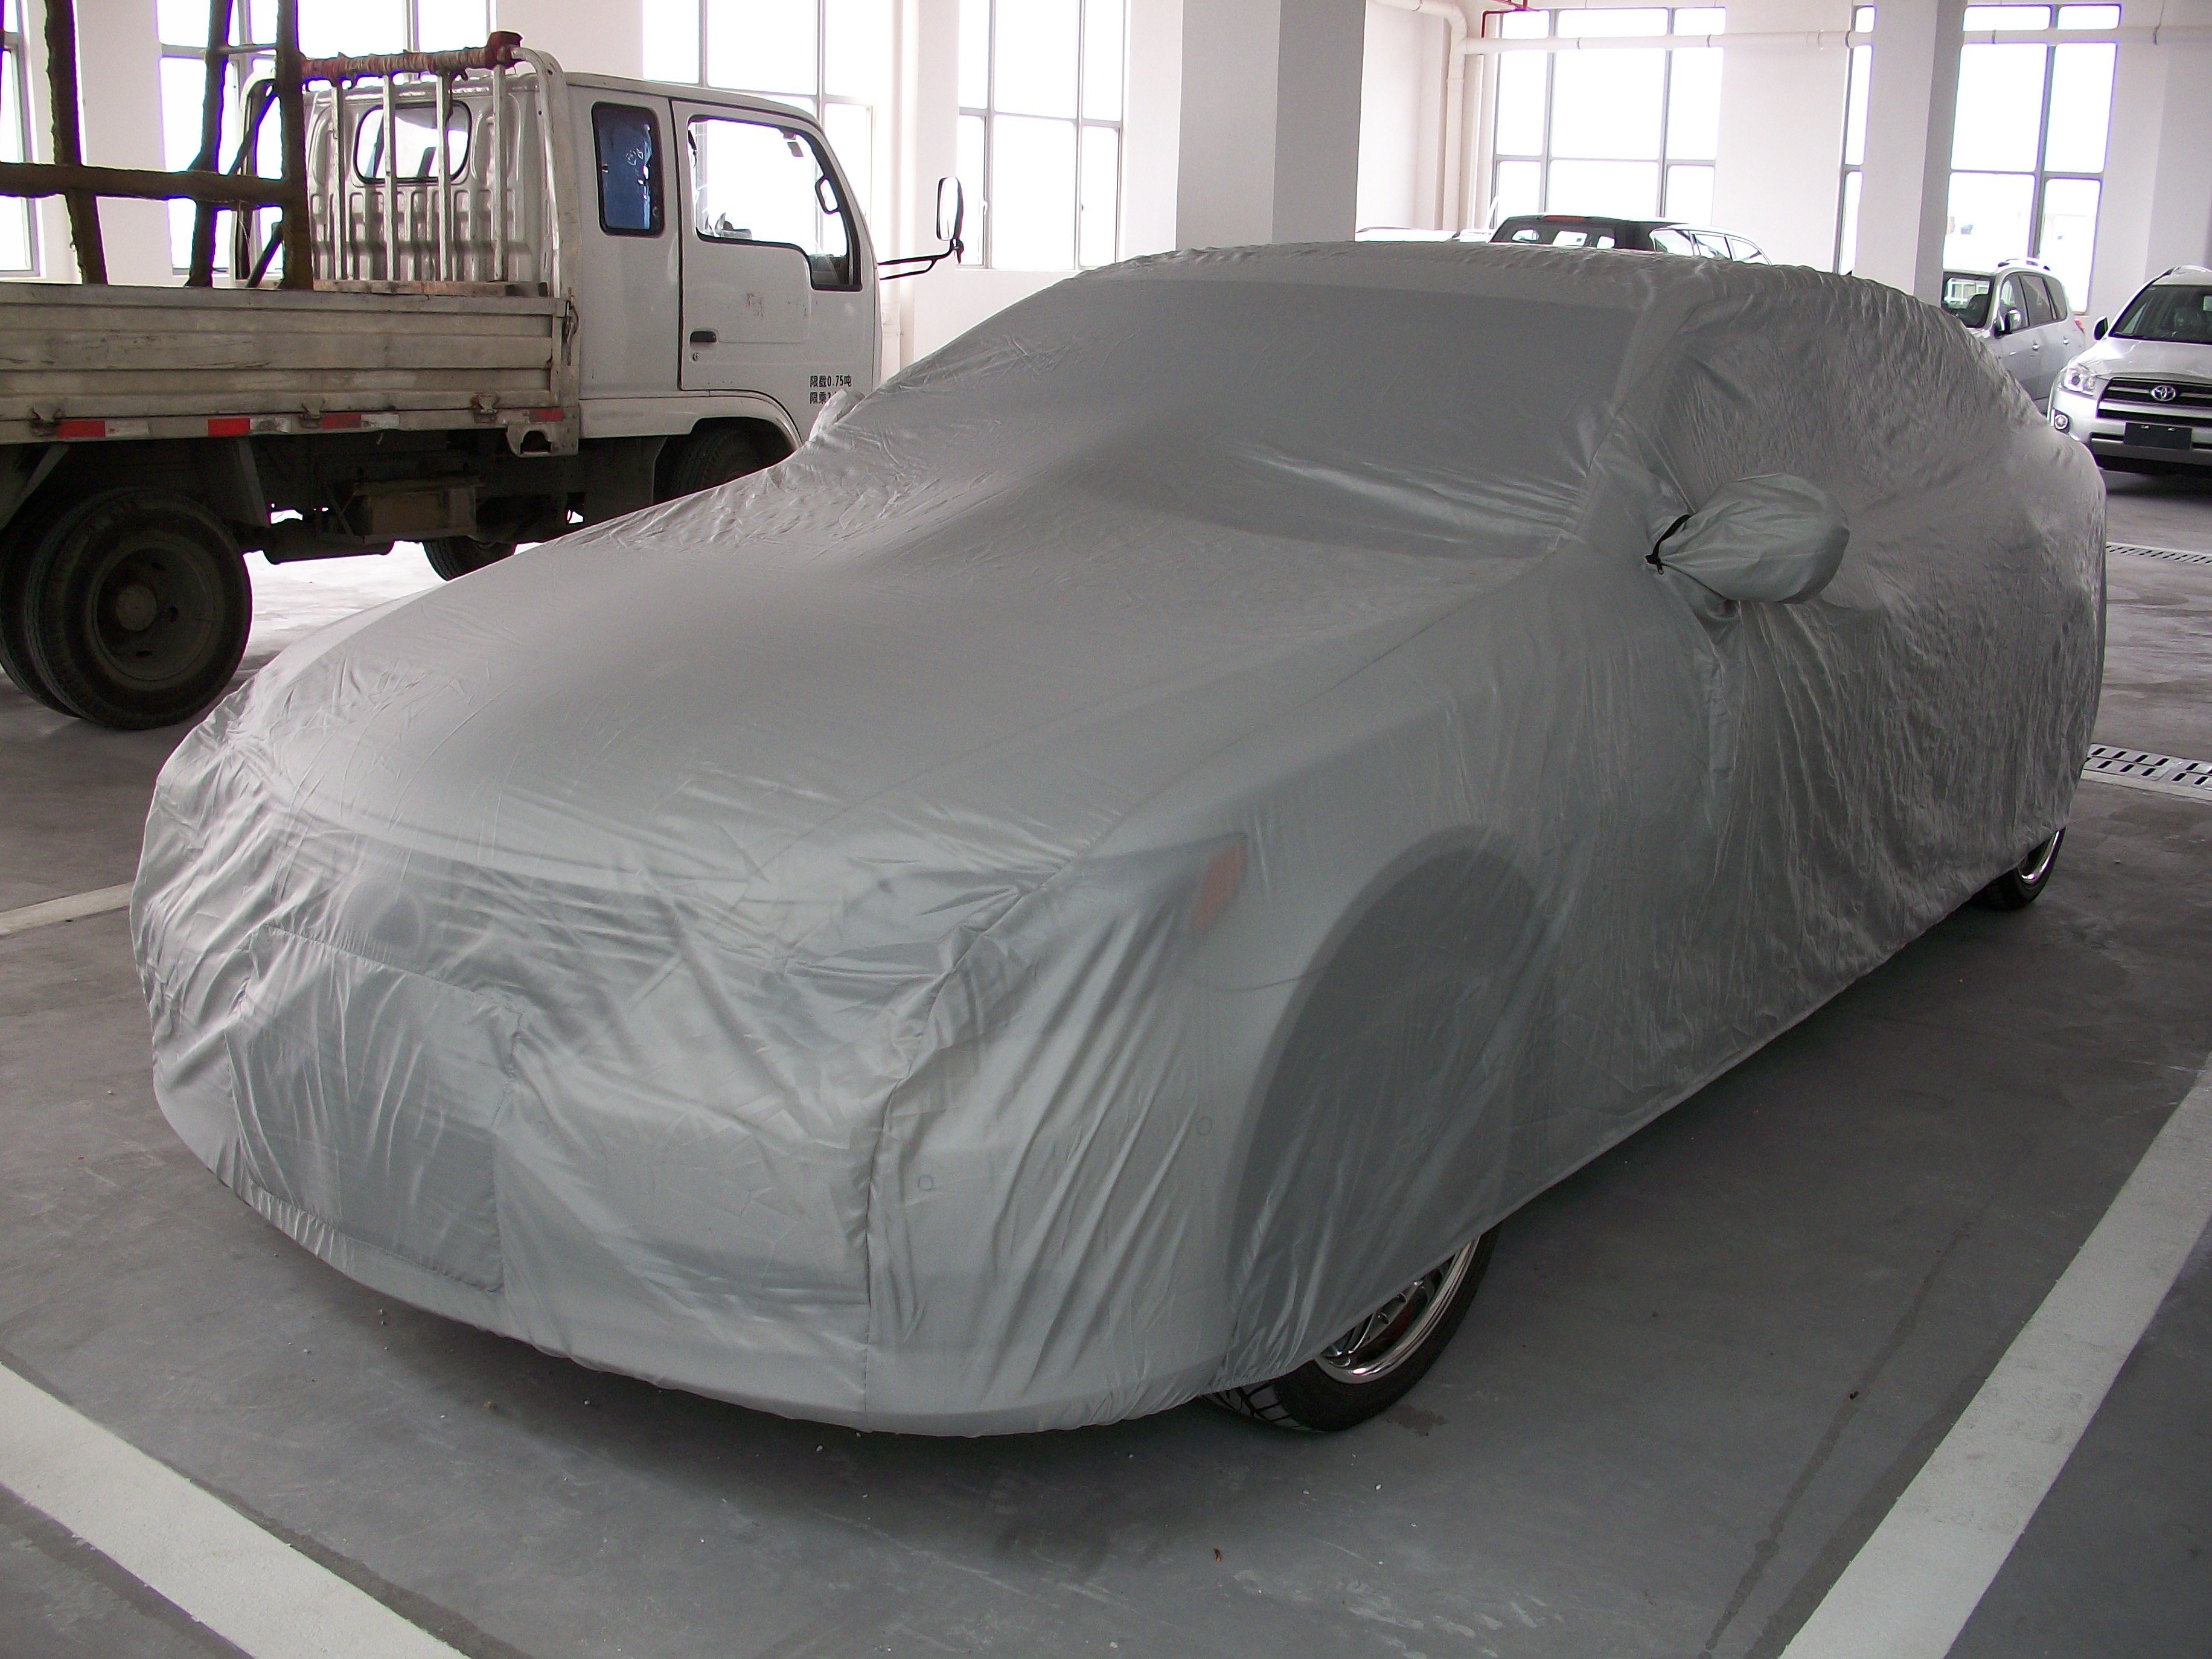 Can Car Covers Scratch or Damage Car Paint?